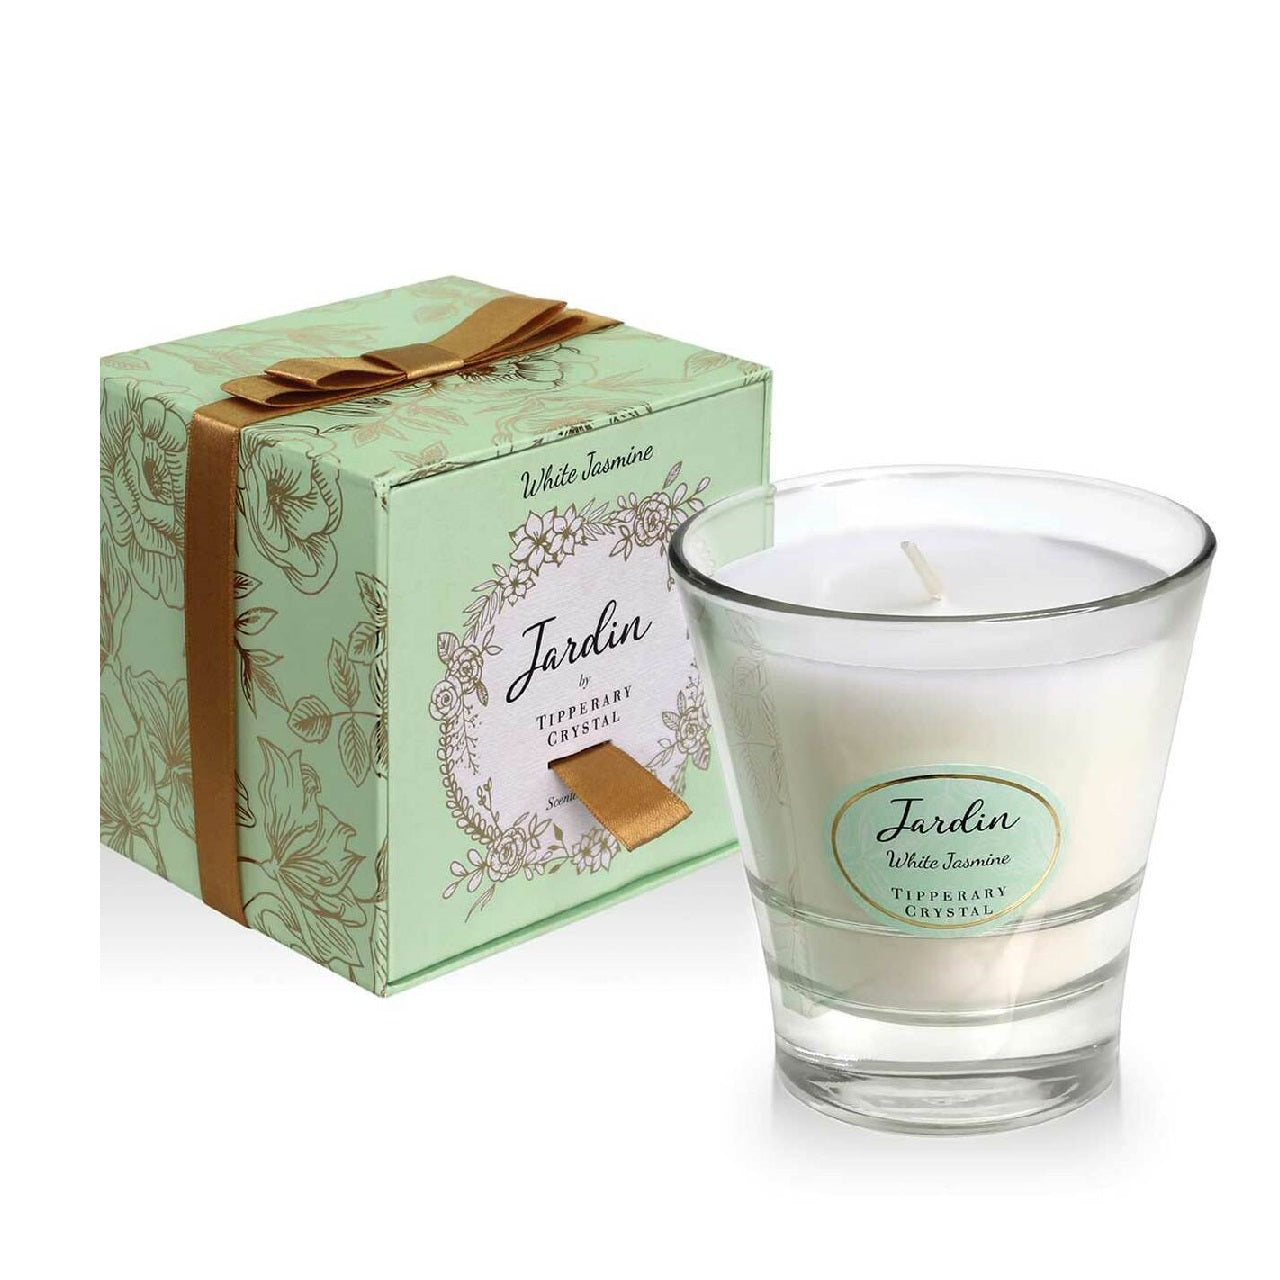 Tipperary Crystal White Jasmine Jardin Collection Candle  White Jasmine The first scent will transport you to a quaint English cottage with windows opening out to a sun-drenched garden filled with beautiful white jasmine.